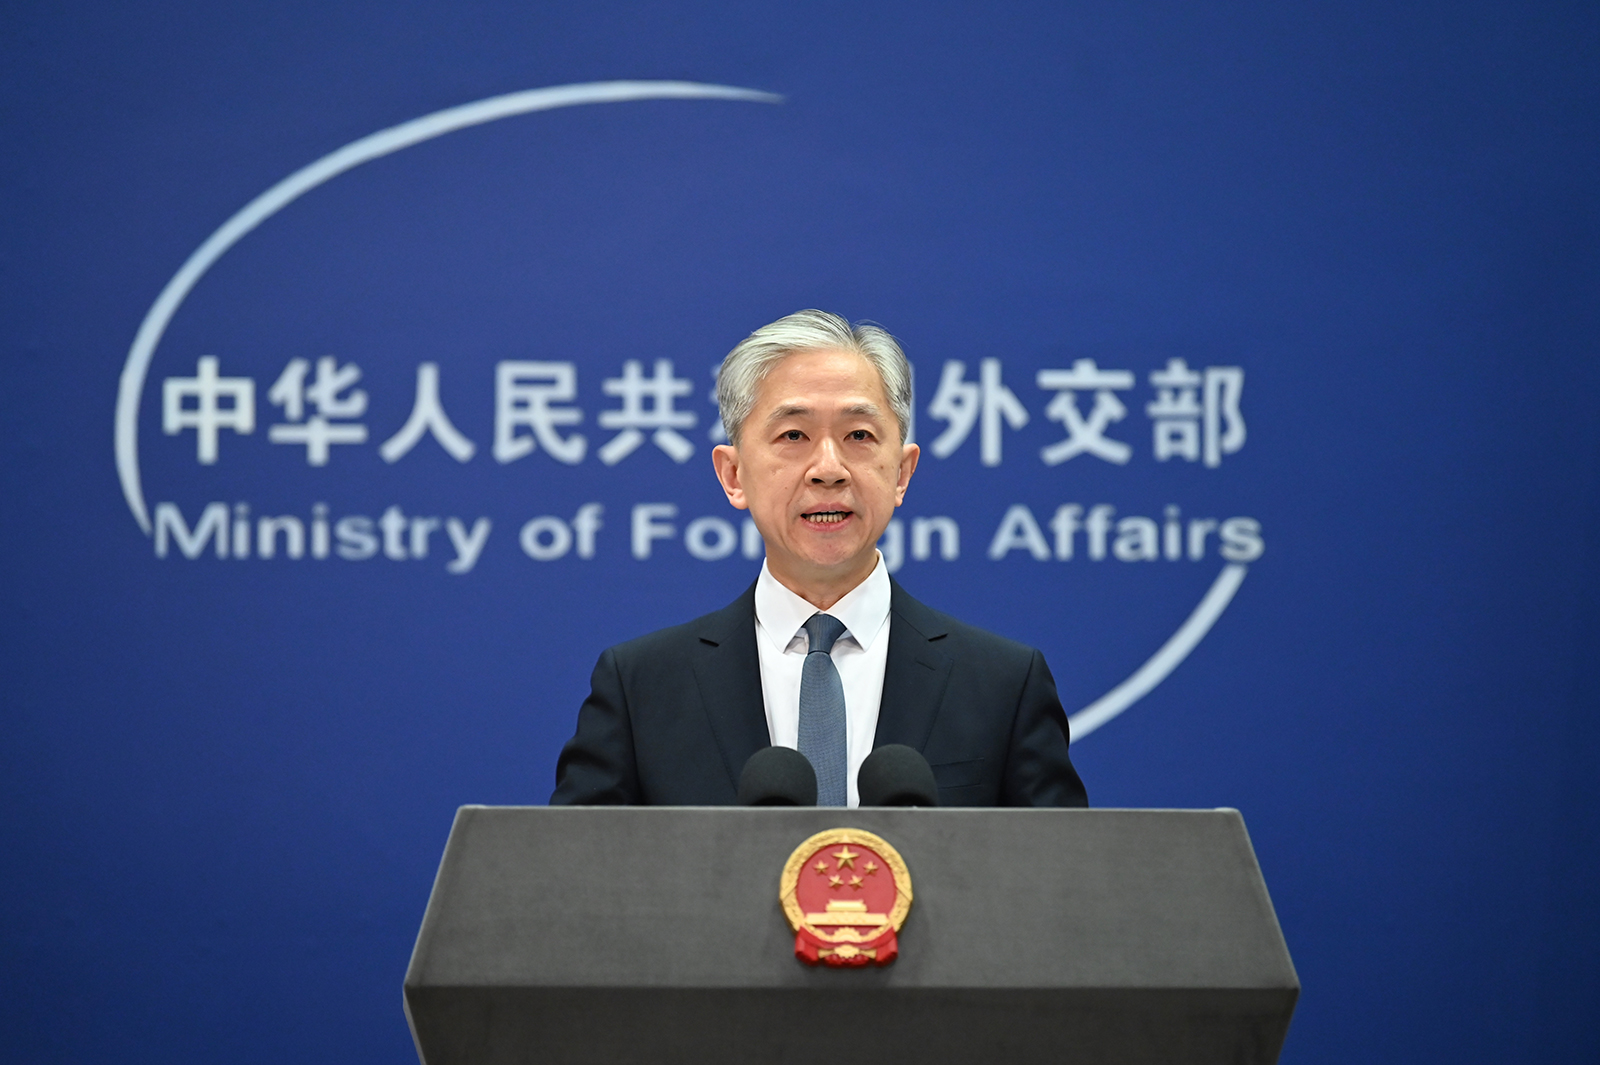 Wang Wenbin, spokesman for the Chinese Foreign Ministry, speaks at a press conference in Beijing, China on March 12.